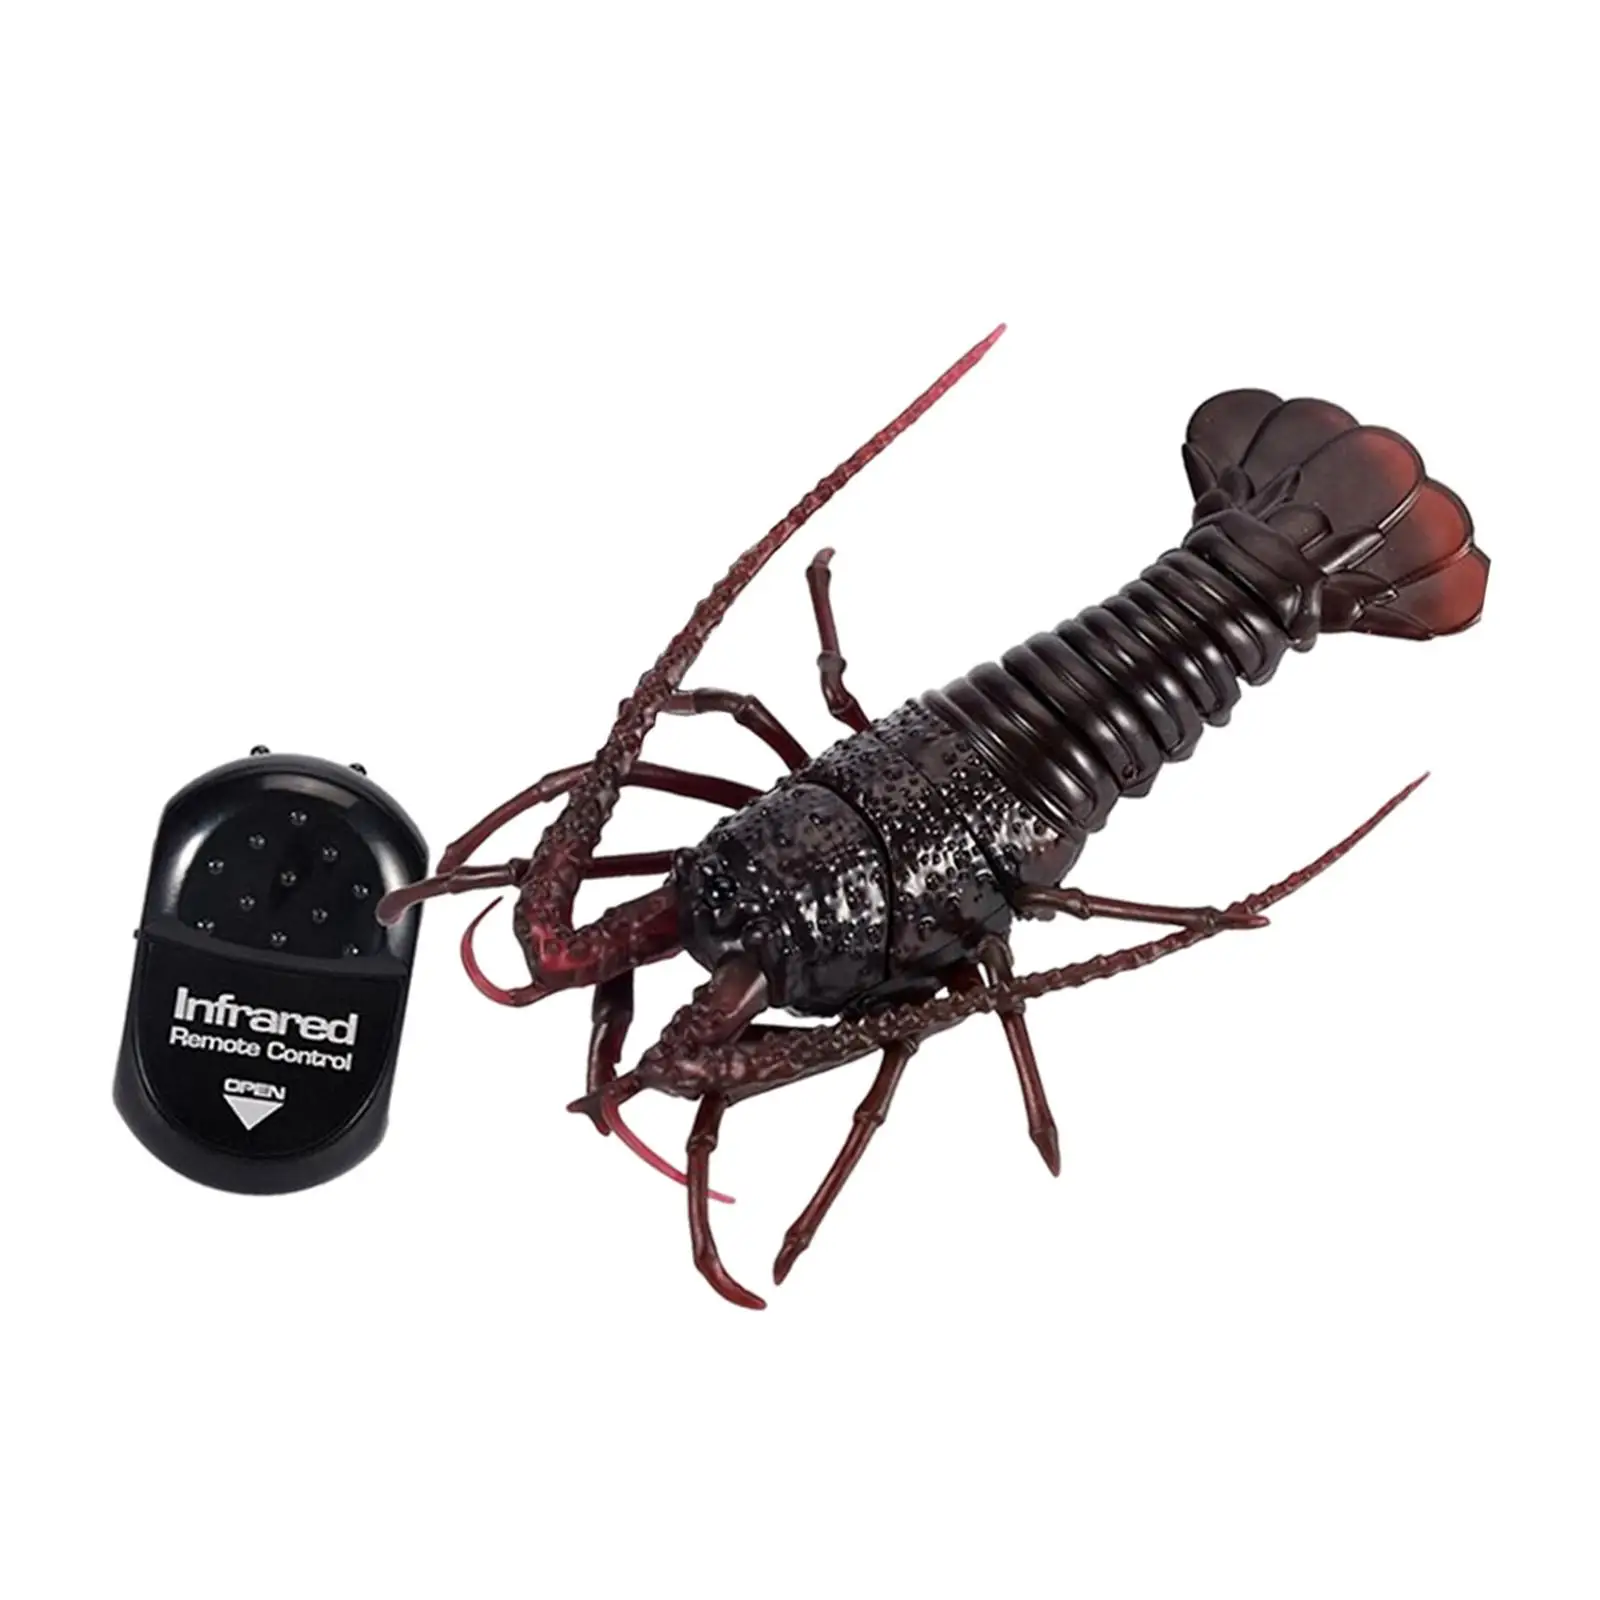 Remote Control Crawfish Toy Realistic Remote Control Vehicle Car Animal Joke Toys Electric Infrared RC Shrimp for Toddler Gifts